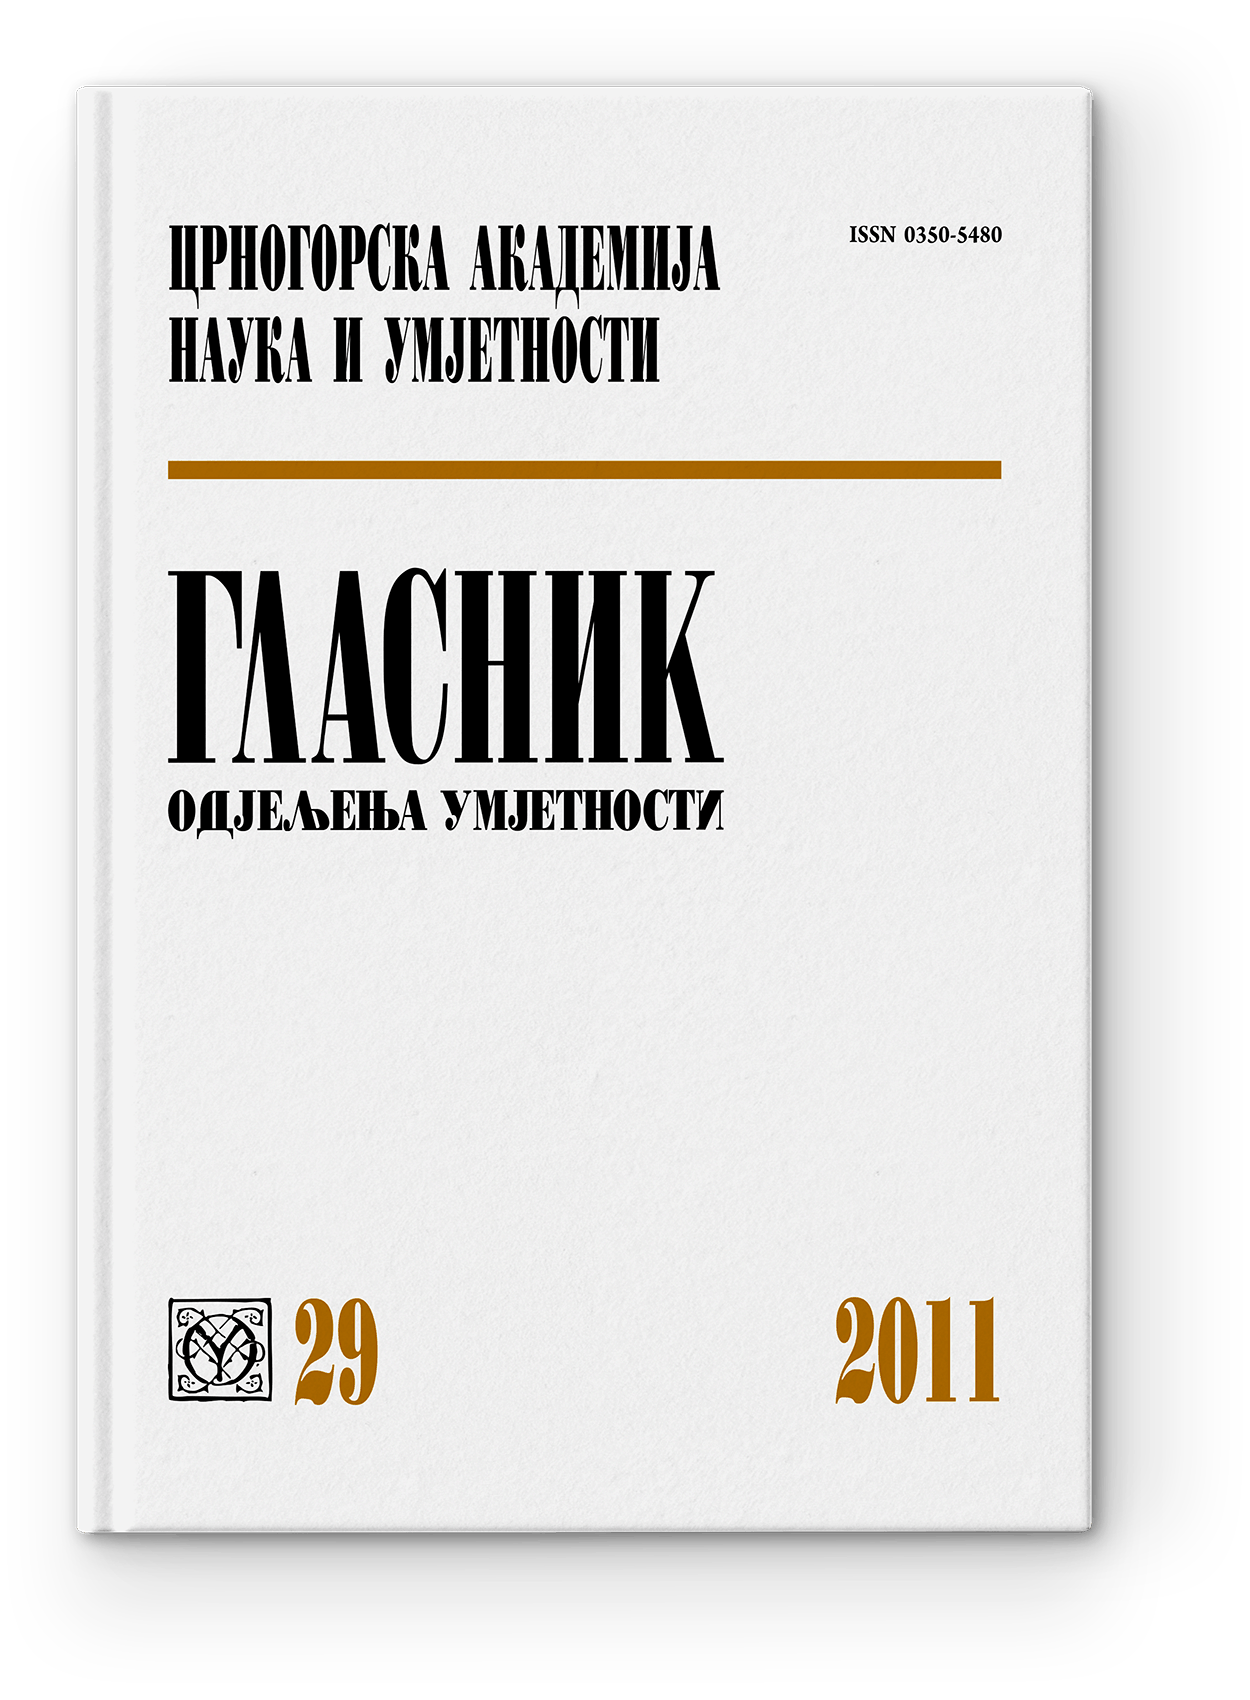 Proceedings of the Department of Arts, 29/2011